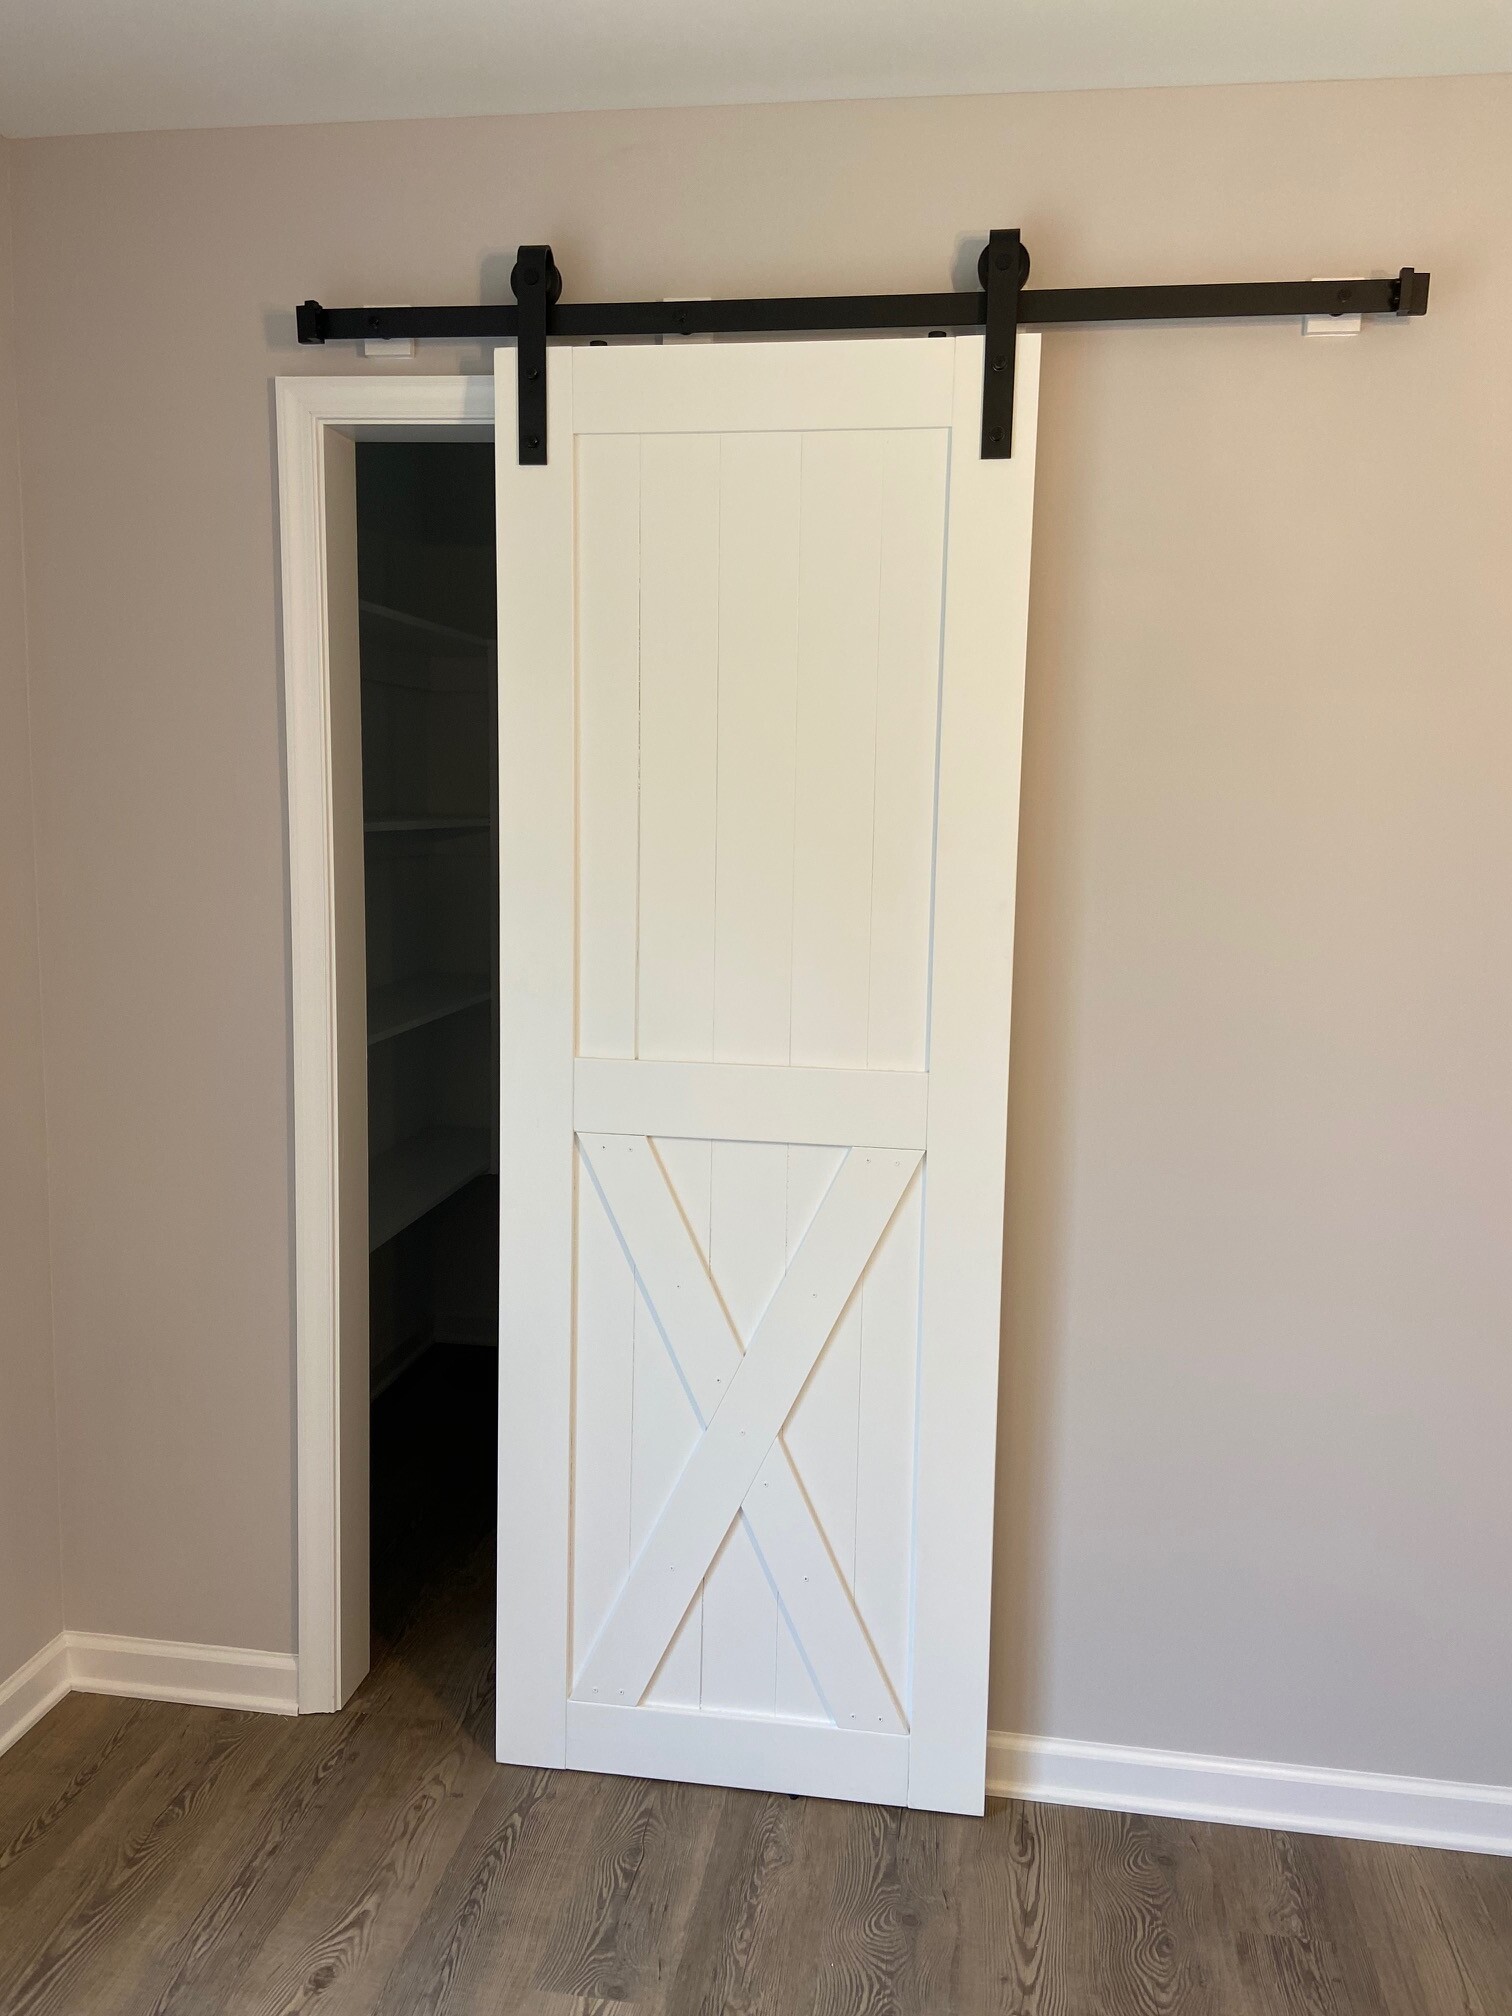 Barn door closet entry by Seely Homes, Delaware